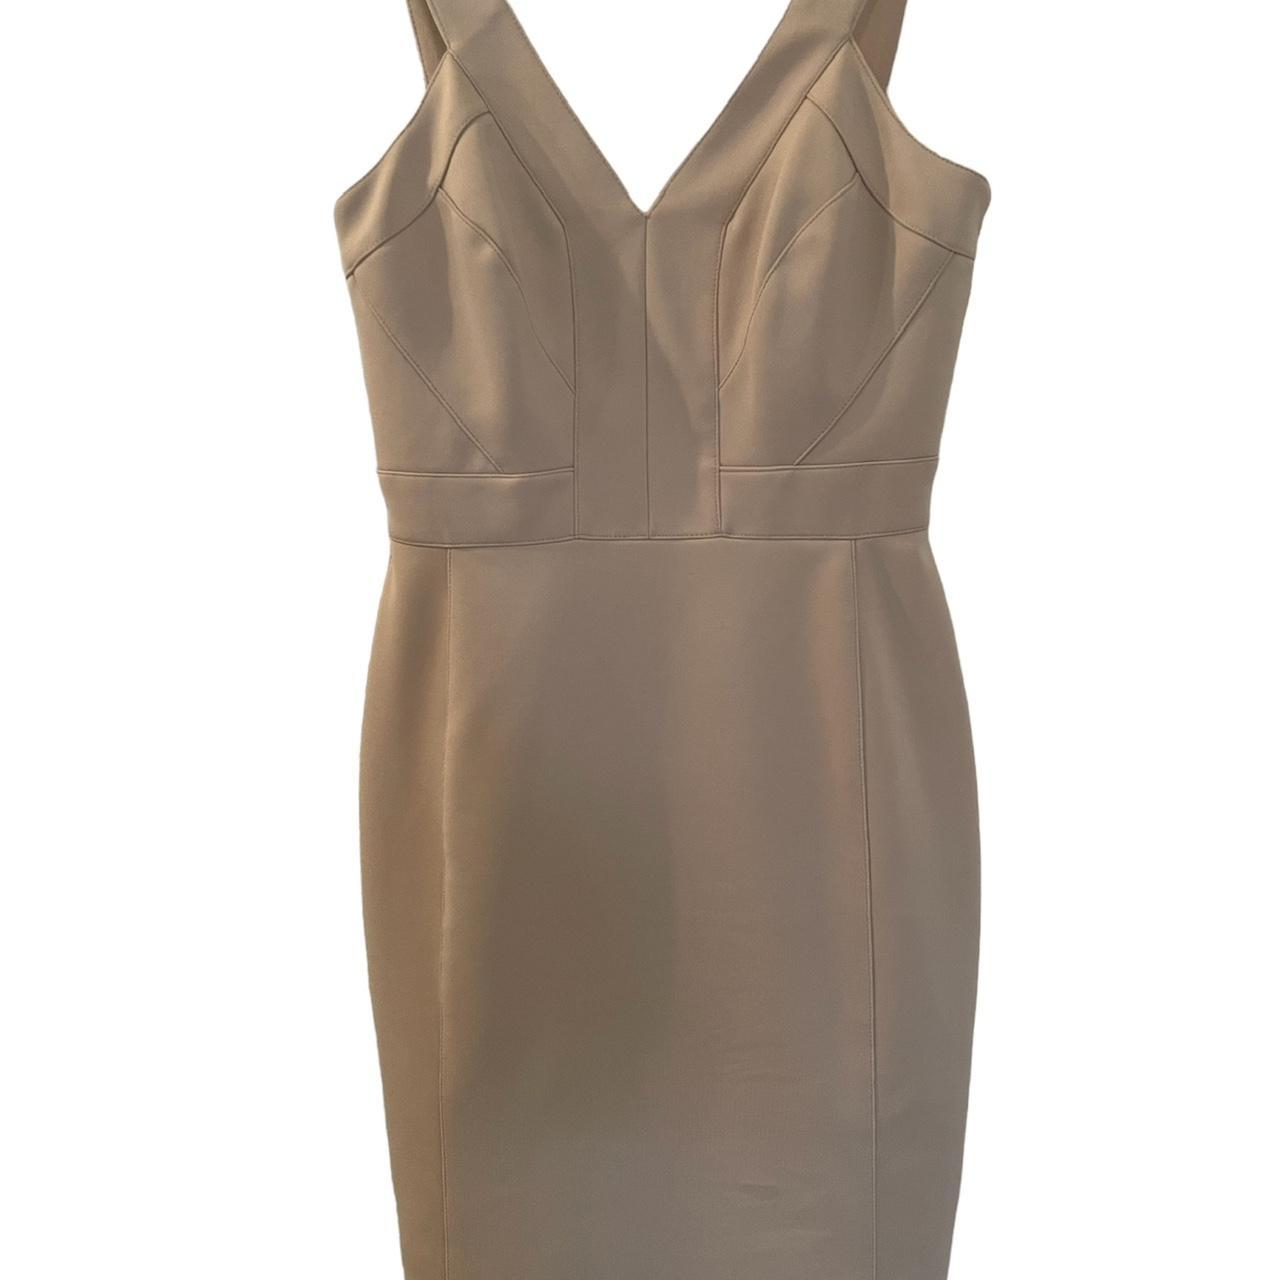 Vince Camuto Women's Tan and Cream Dress (2)